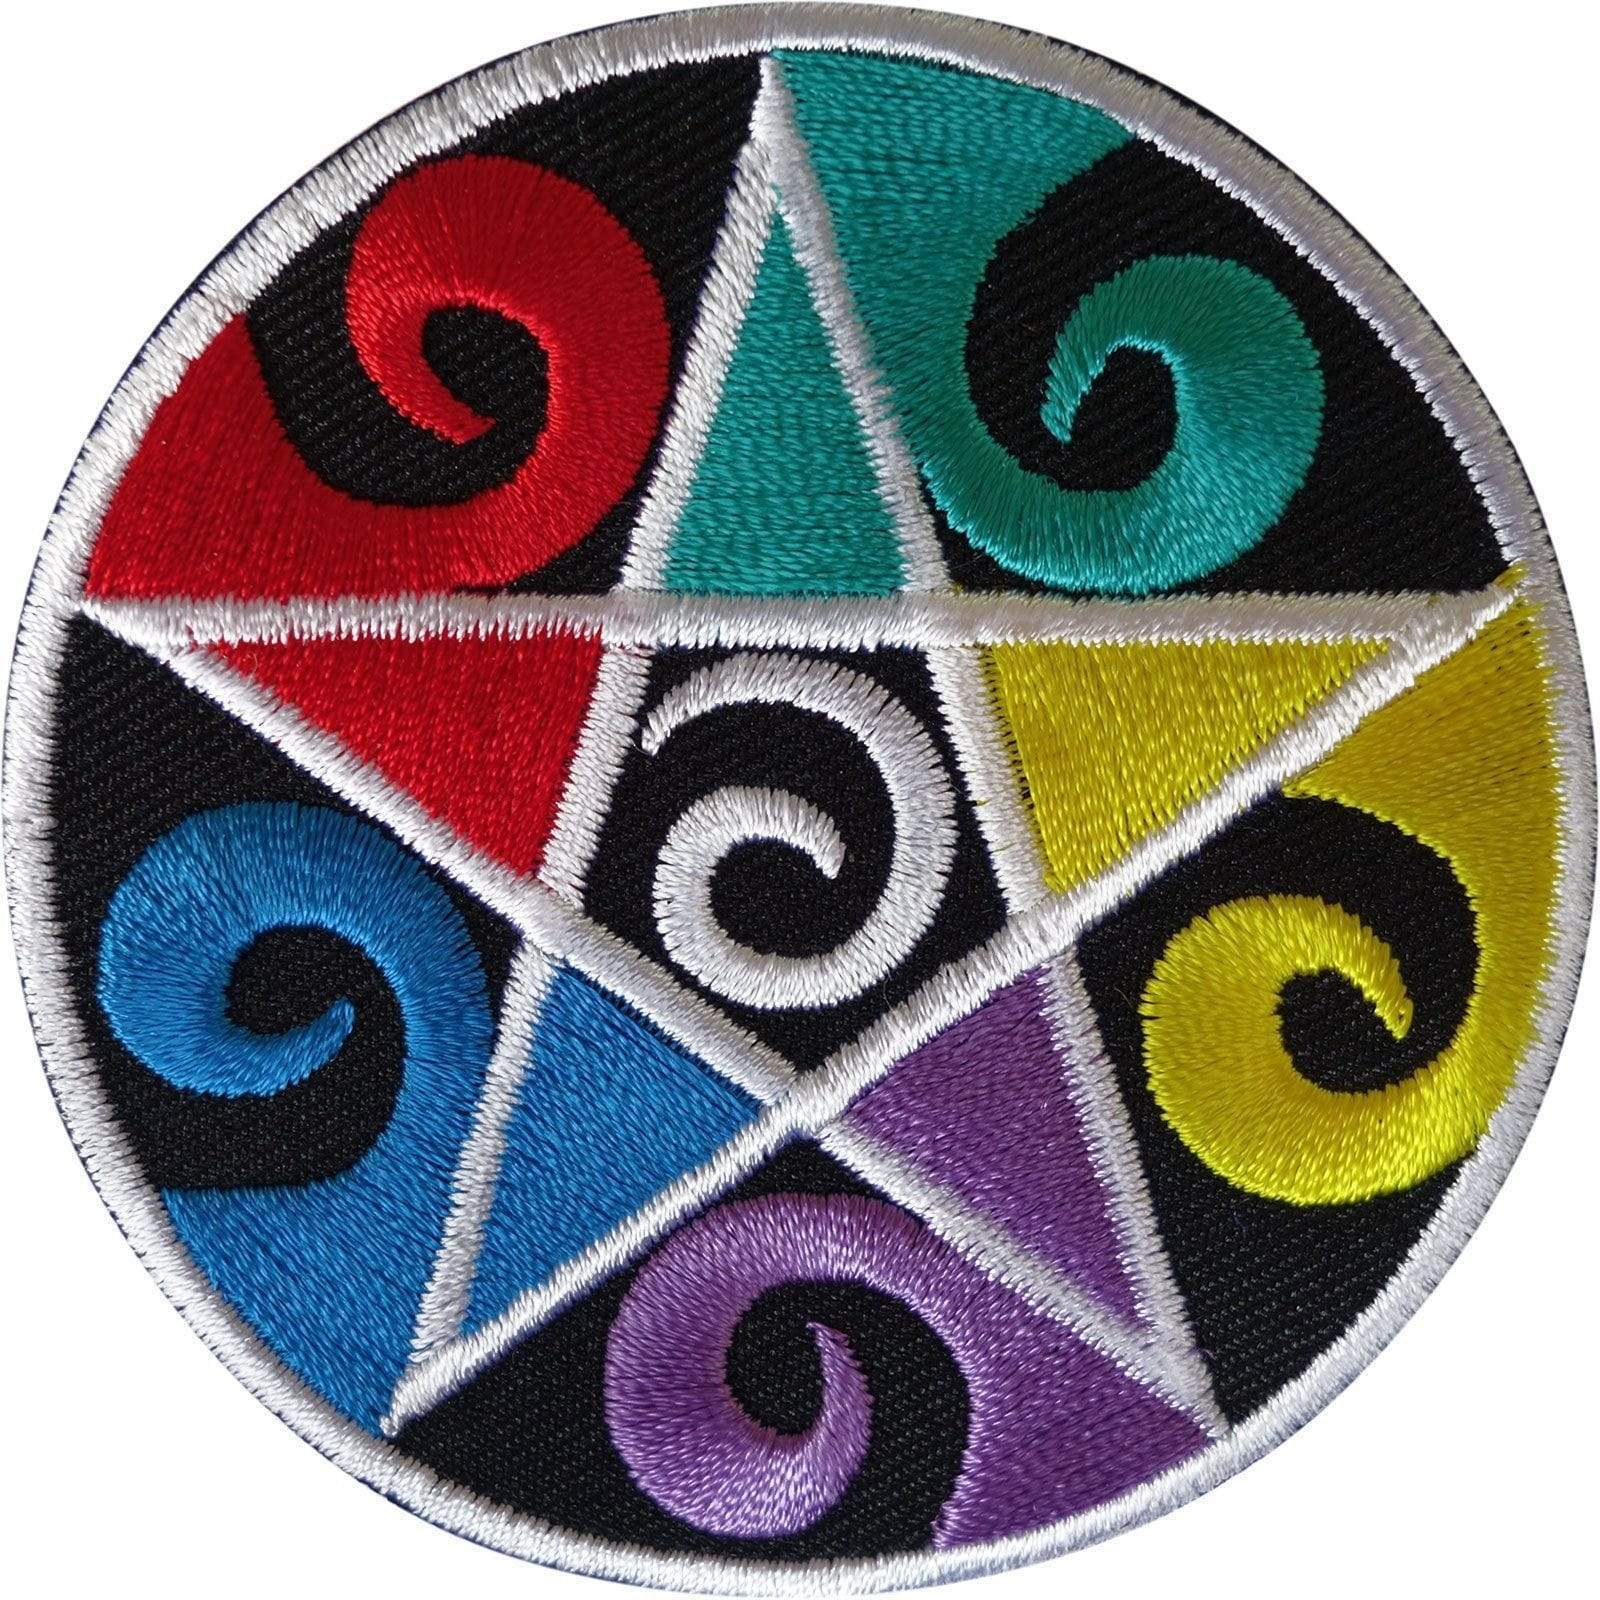 Pentagram Patch Iron Sew On Clothes Star Embroidered Badge Embroidery Applique